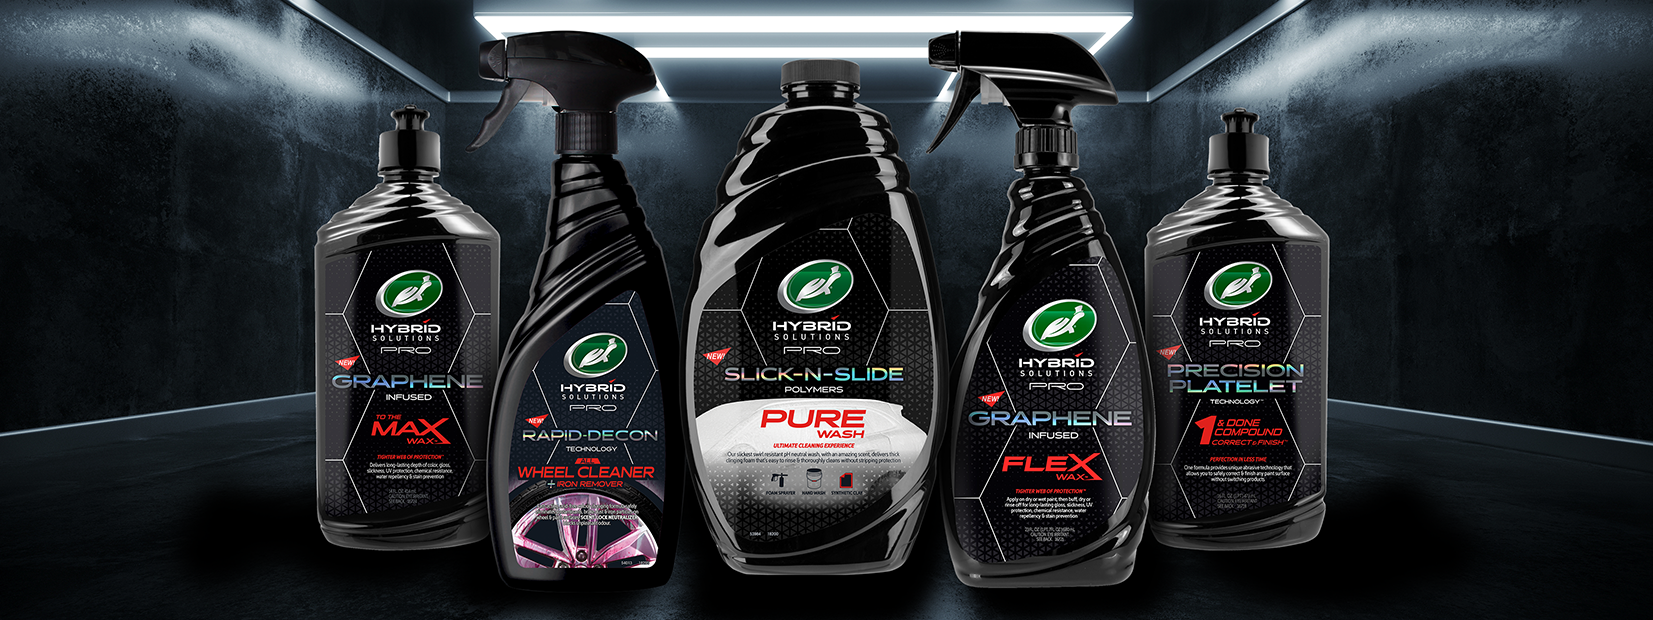 NEW!! How to use Turtle wax Flex wax Hybrid solutions Pro Graphene